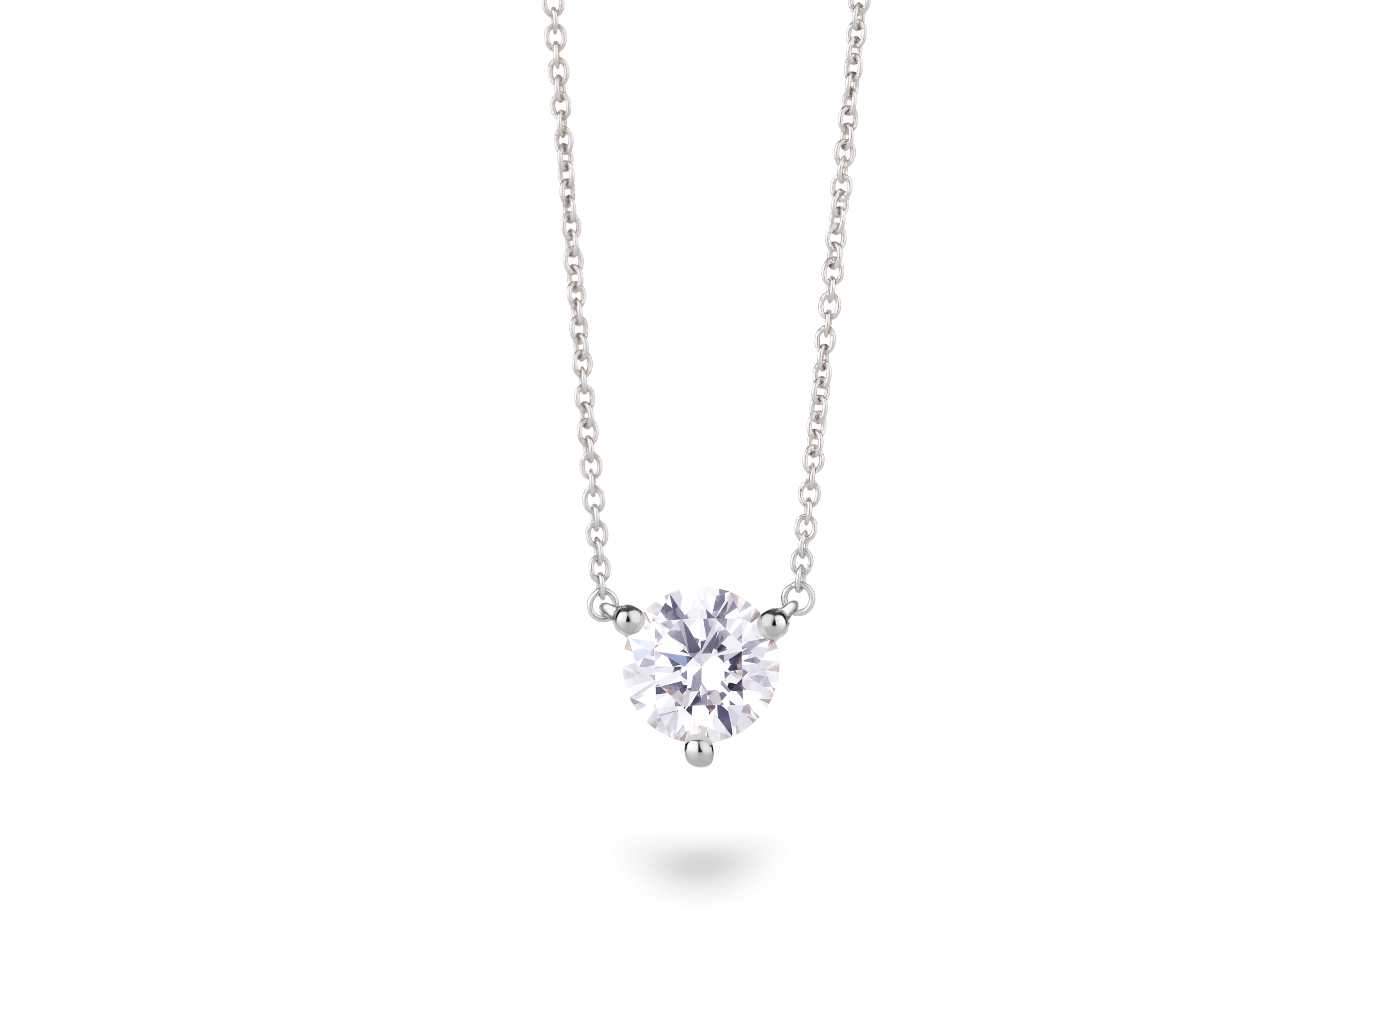 white-solitaire-pendant-wg-1ct-front_1536x1536_86427fff-8677-4675-acfe-1c1948912daf_1800x1800.jpg